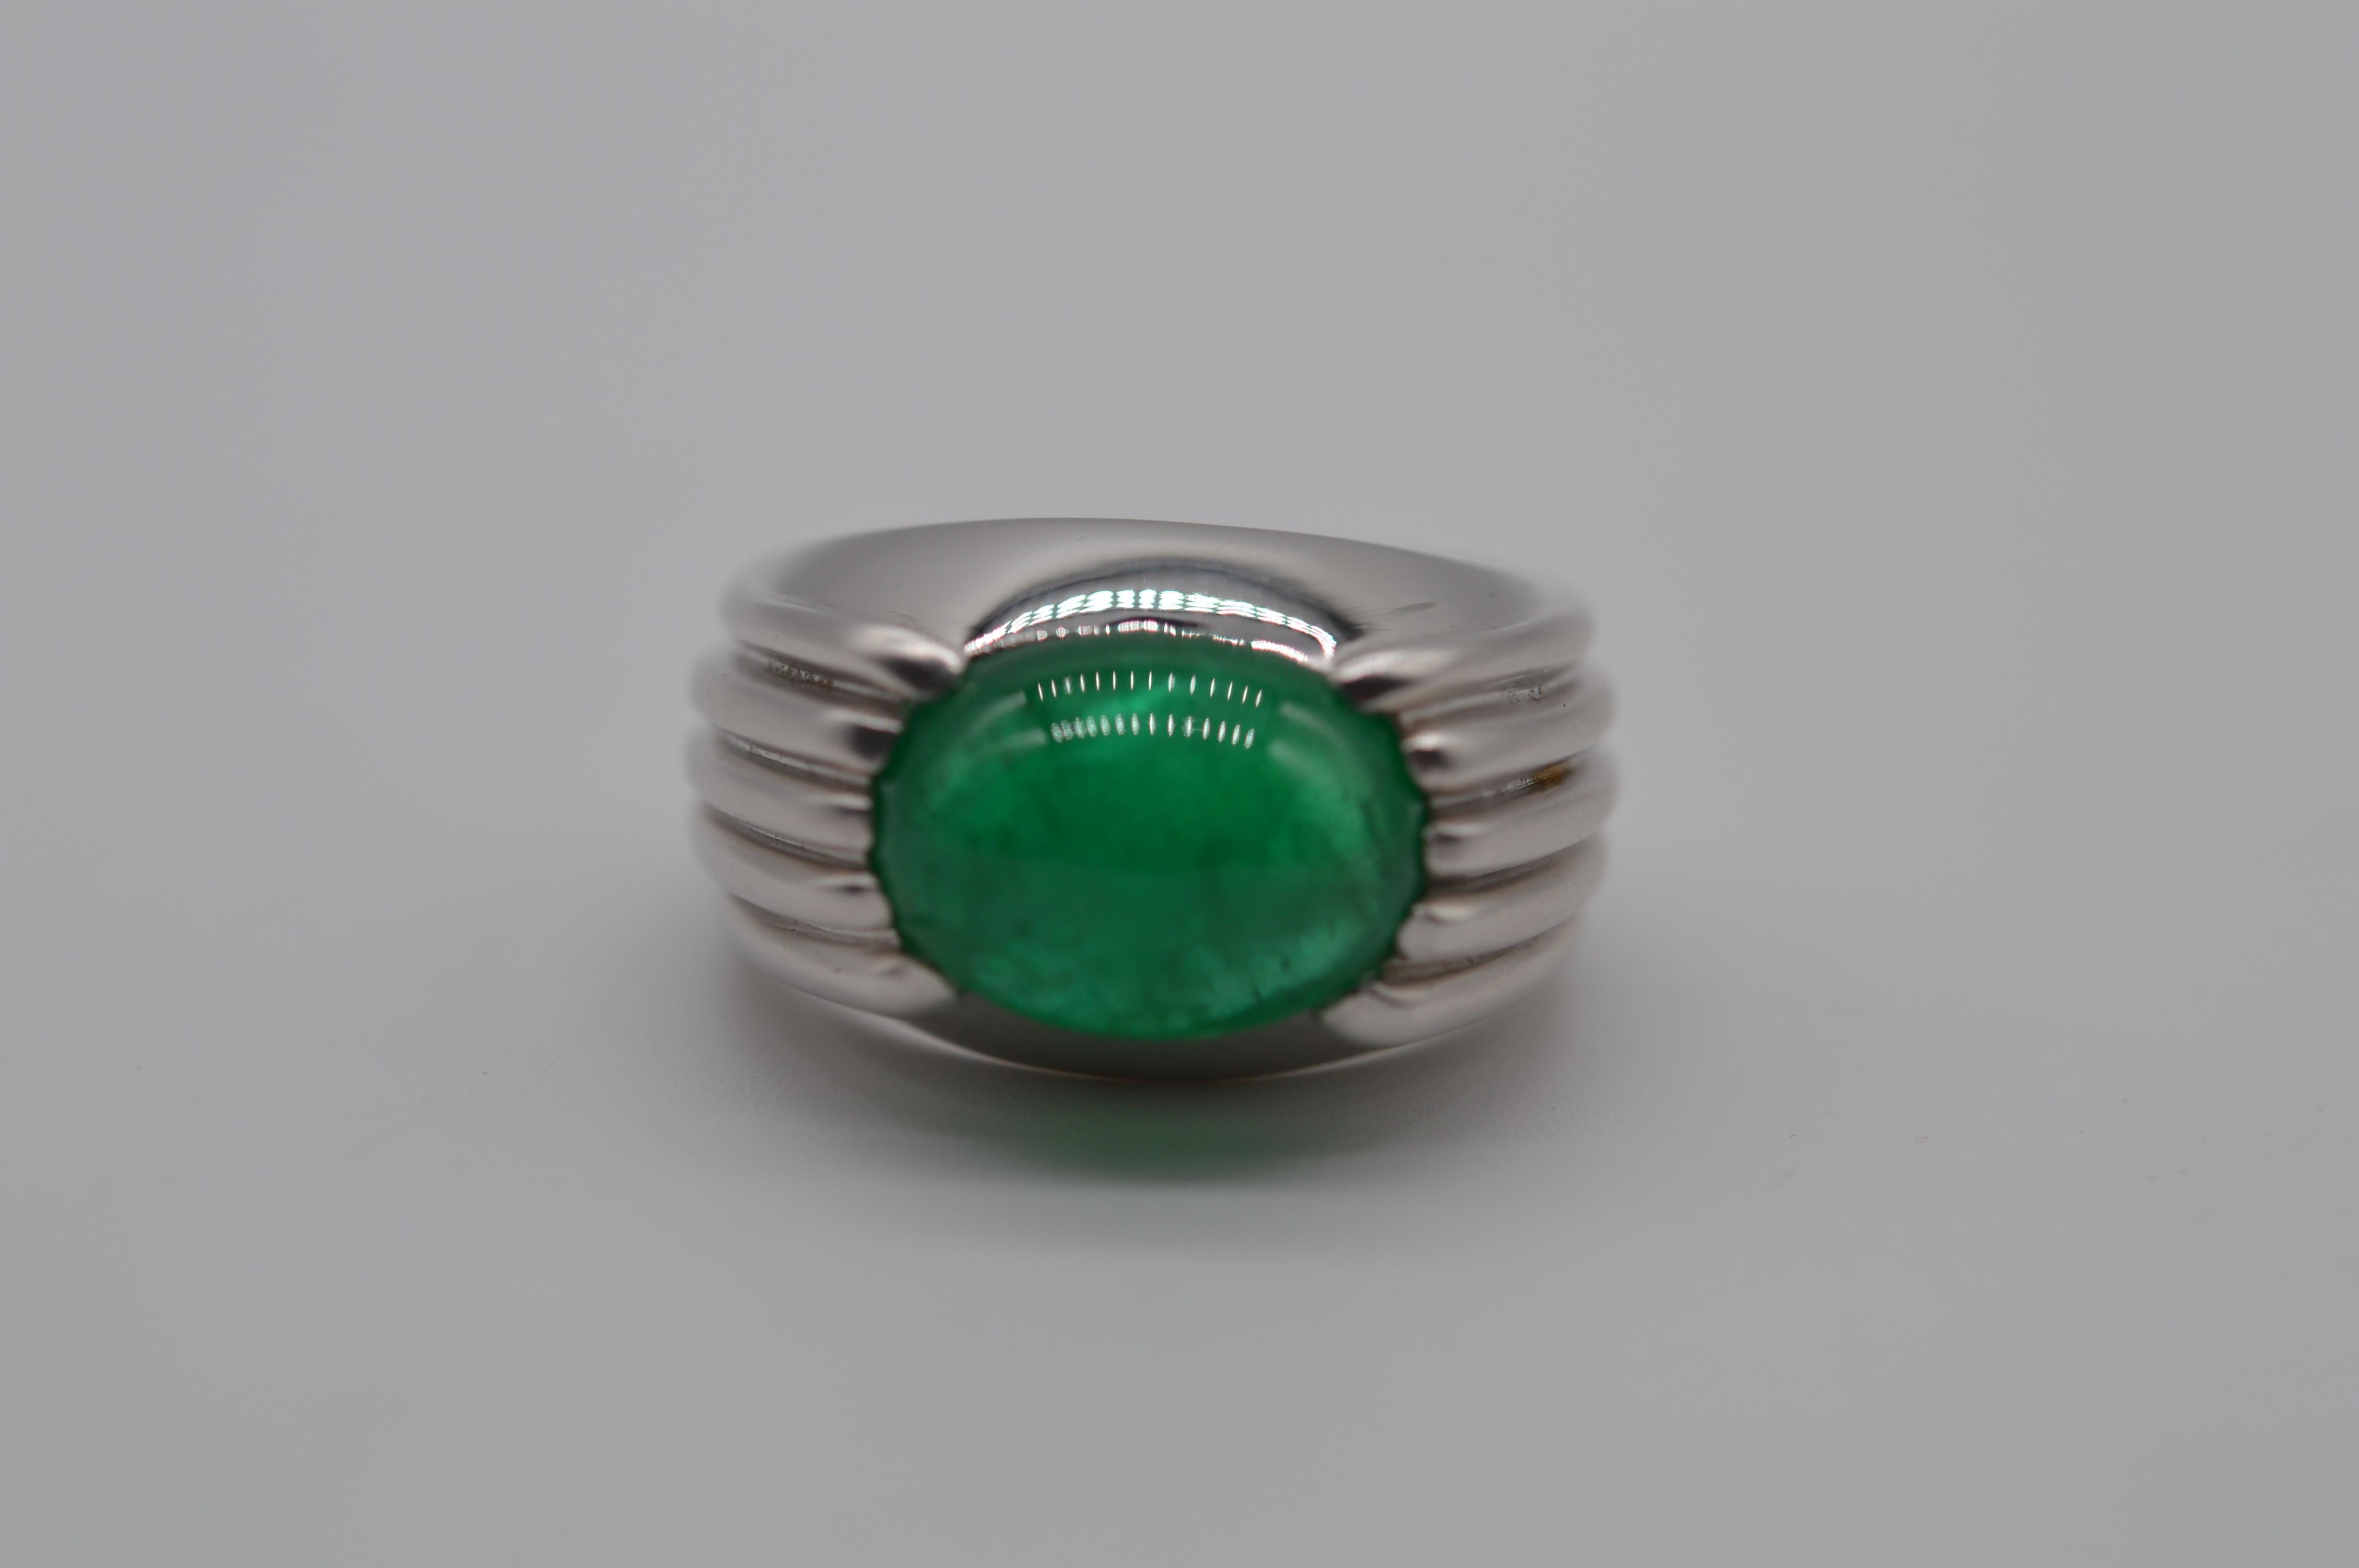 Zambian Cabochon Emerald Ring 7.82 carats Unworn
Mounted in an 18K White Gold Ring
The ring size is 61
The total weight is 25 grams
Unworn condition